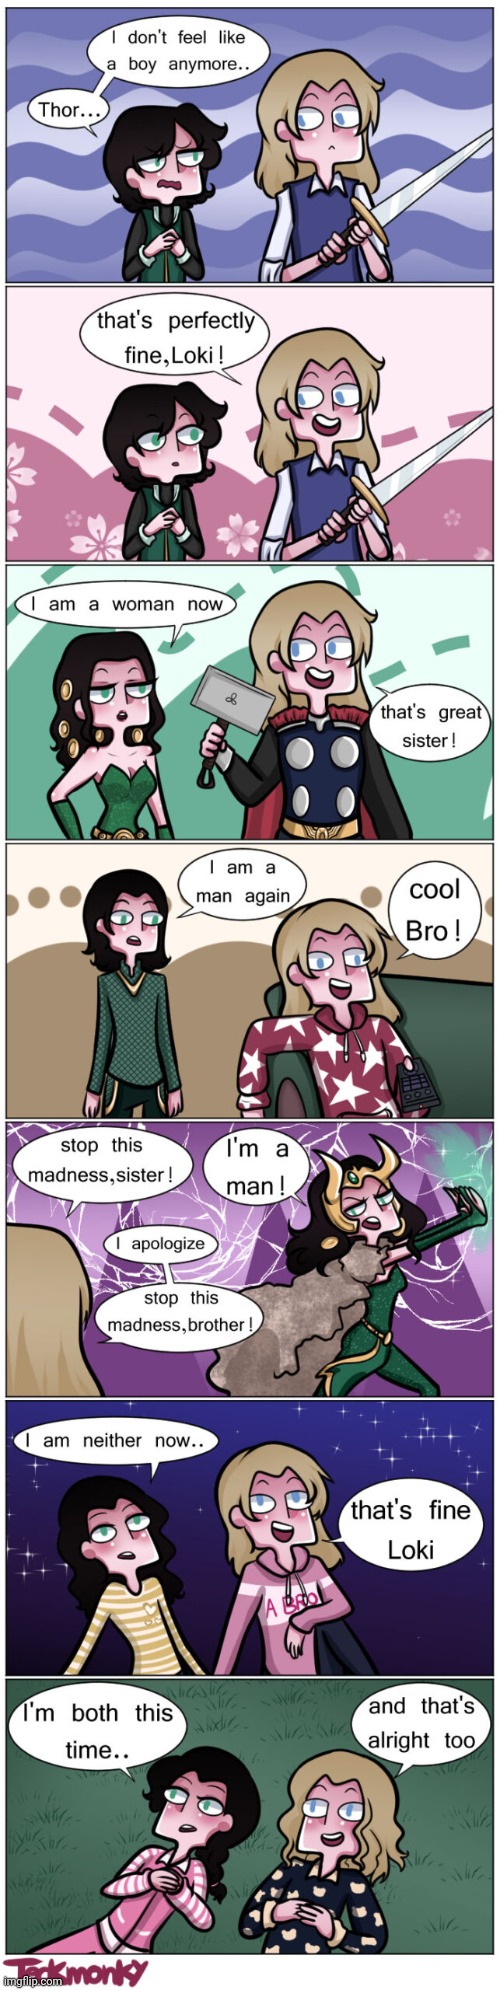 Loki has given birth many times. | image tagged in lgbt,mythology,tolerance,comics/cartoons,thor,gender fluid | made w/ Imgflip meme maker